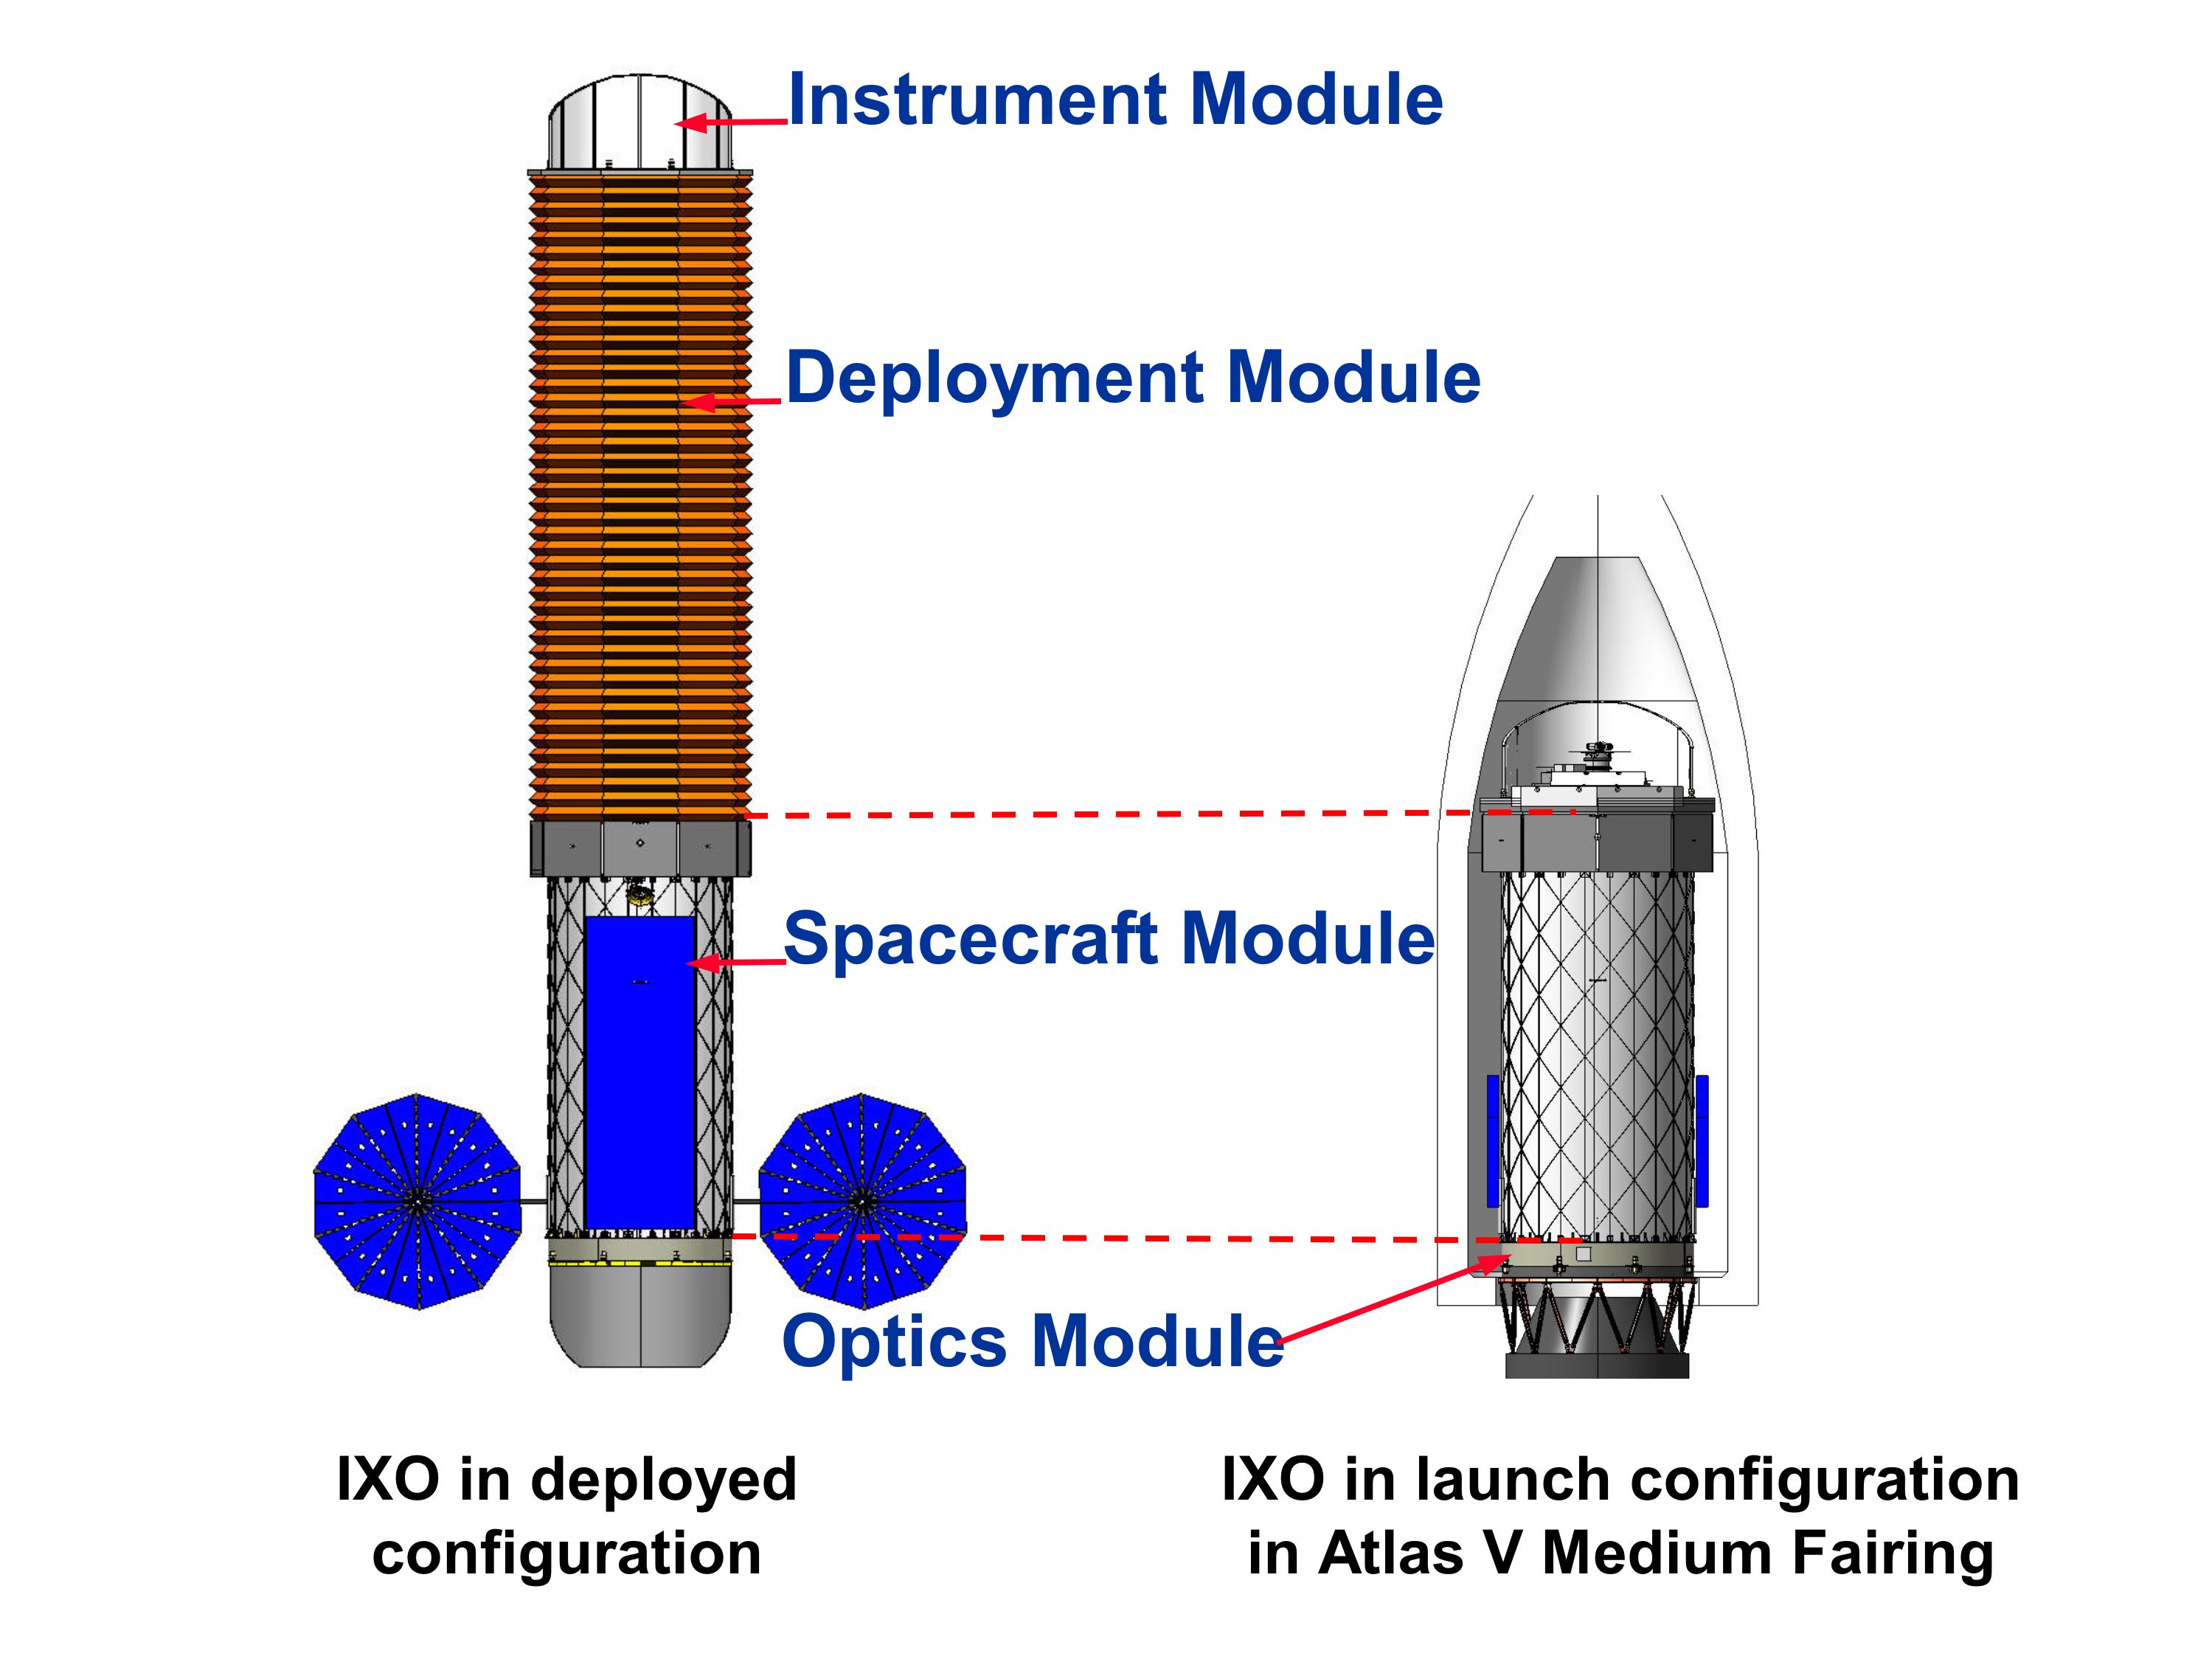 Observatory in On-orbit and Launch Configurations